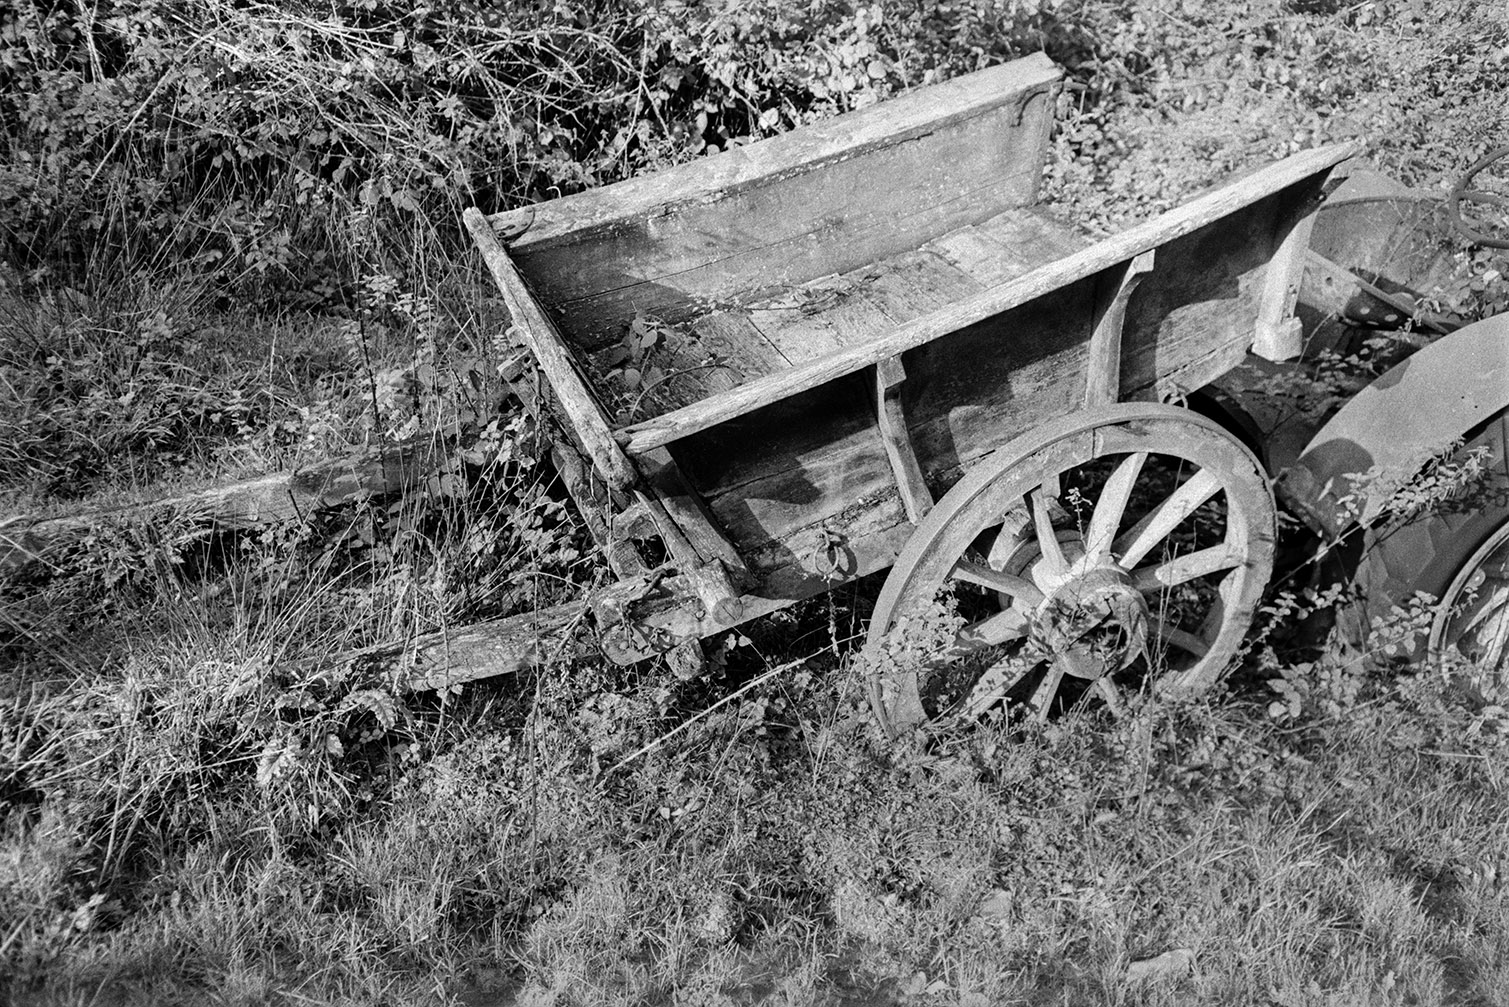 An old wooden cart overgrown by brambles, at a reclamation yard at Umberleigh.